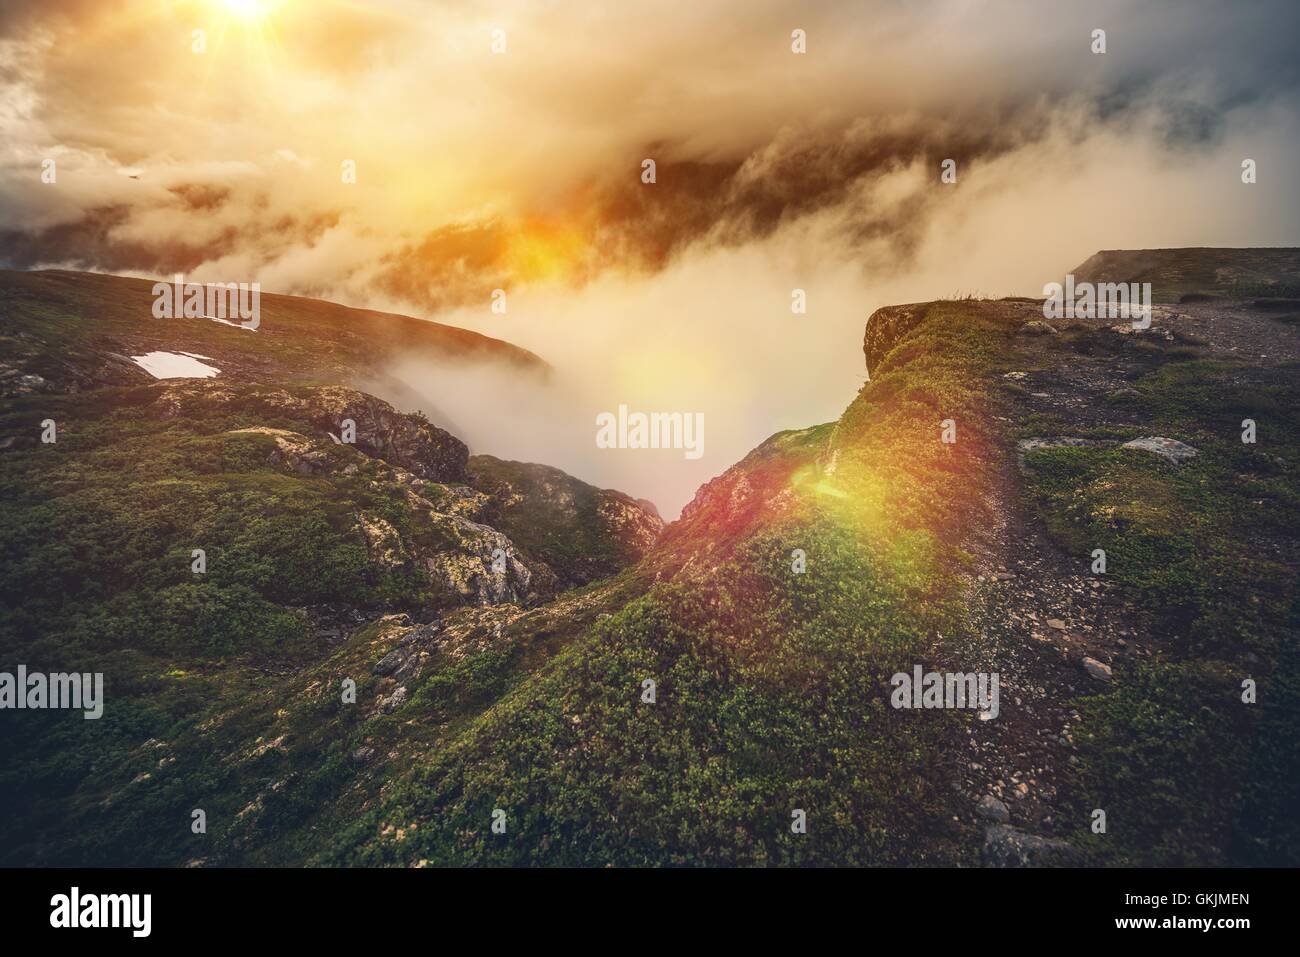 Norway Mountains in Clouds. Foggy Mountain Scenery. Norway, Europe. Stock Photo